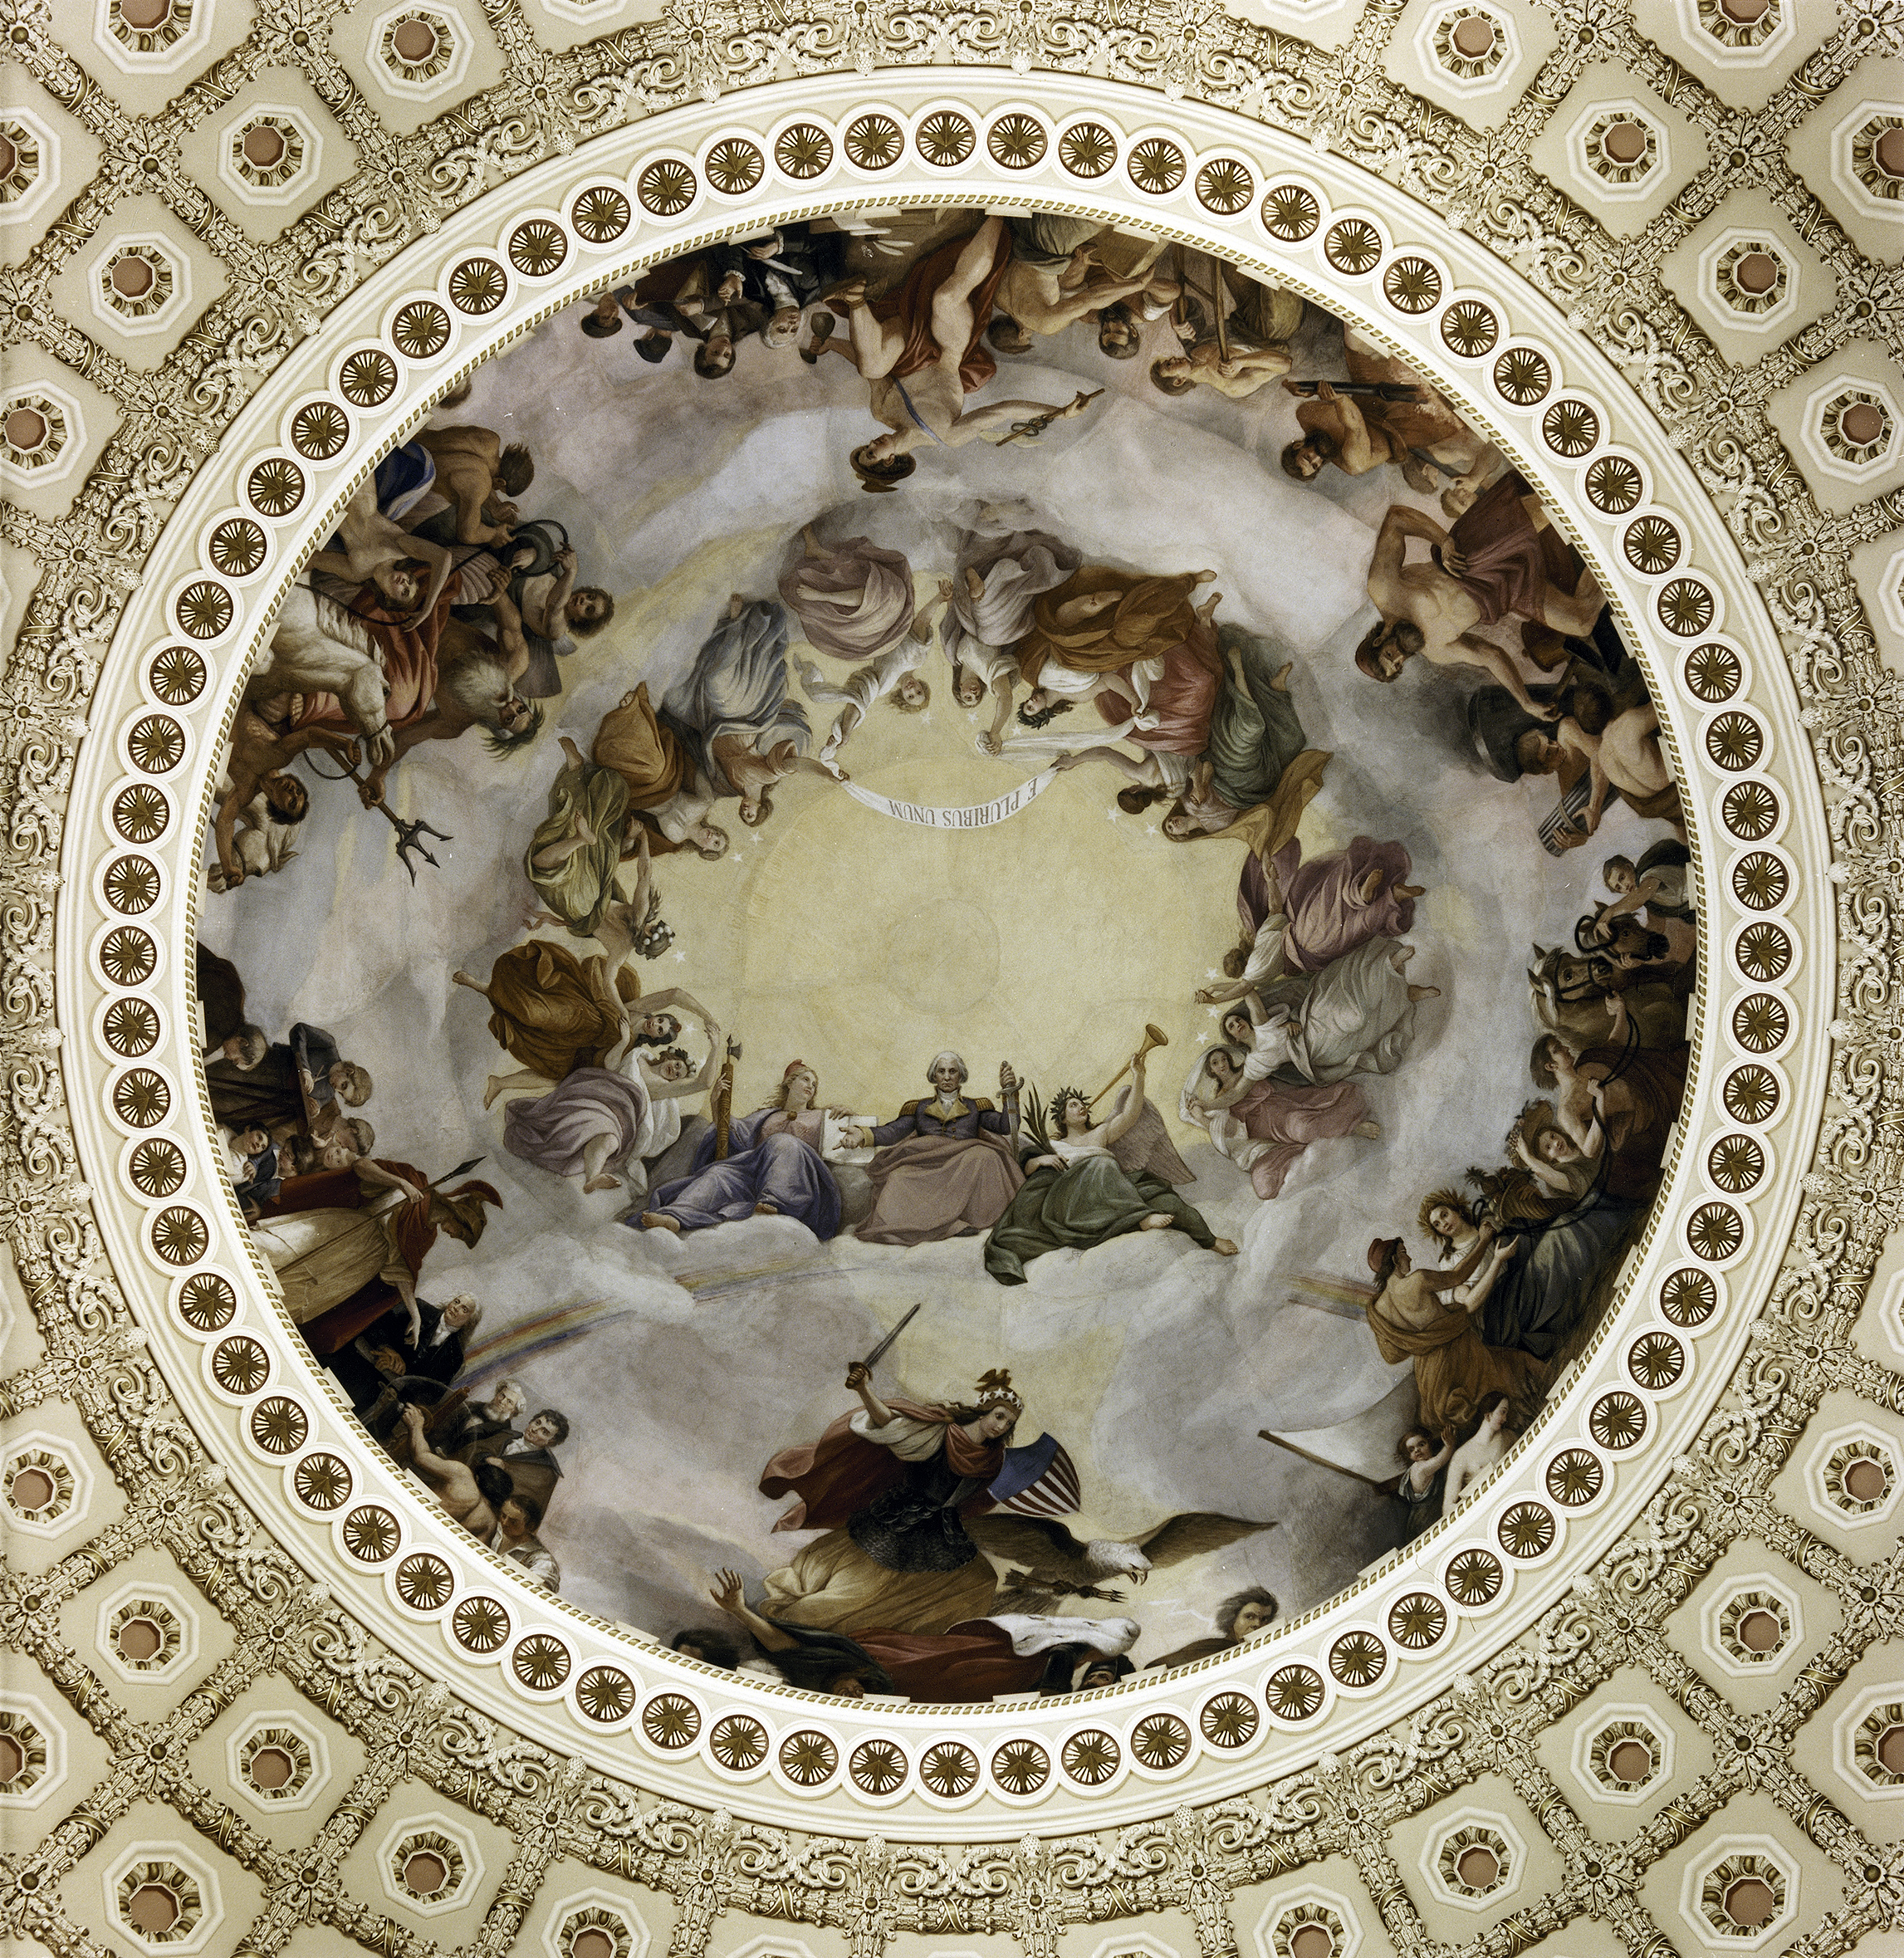 Capitol Dome Painting